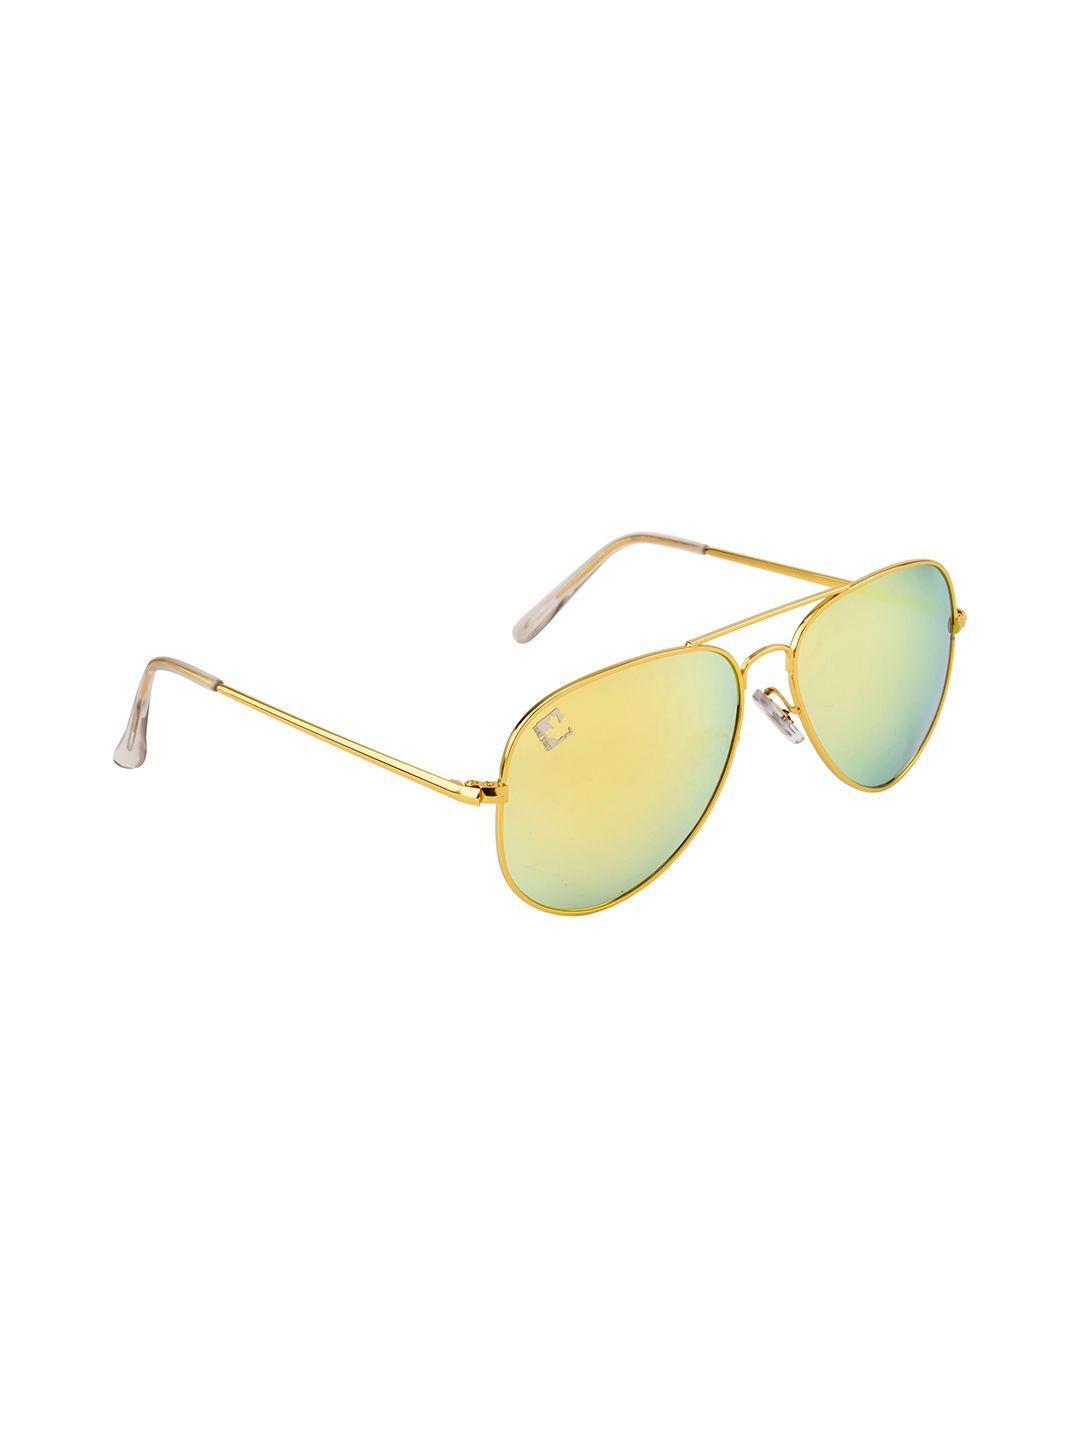 clark n palmer unisex gold lens & gold-toned aviator sunglasses with polarised and uv protected lens